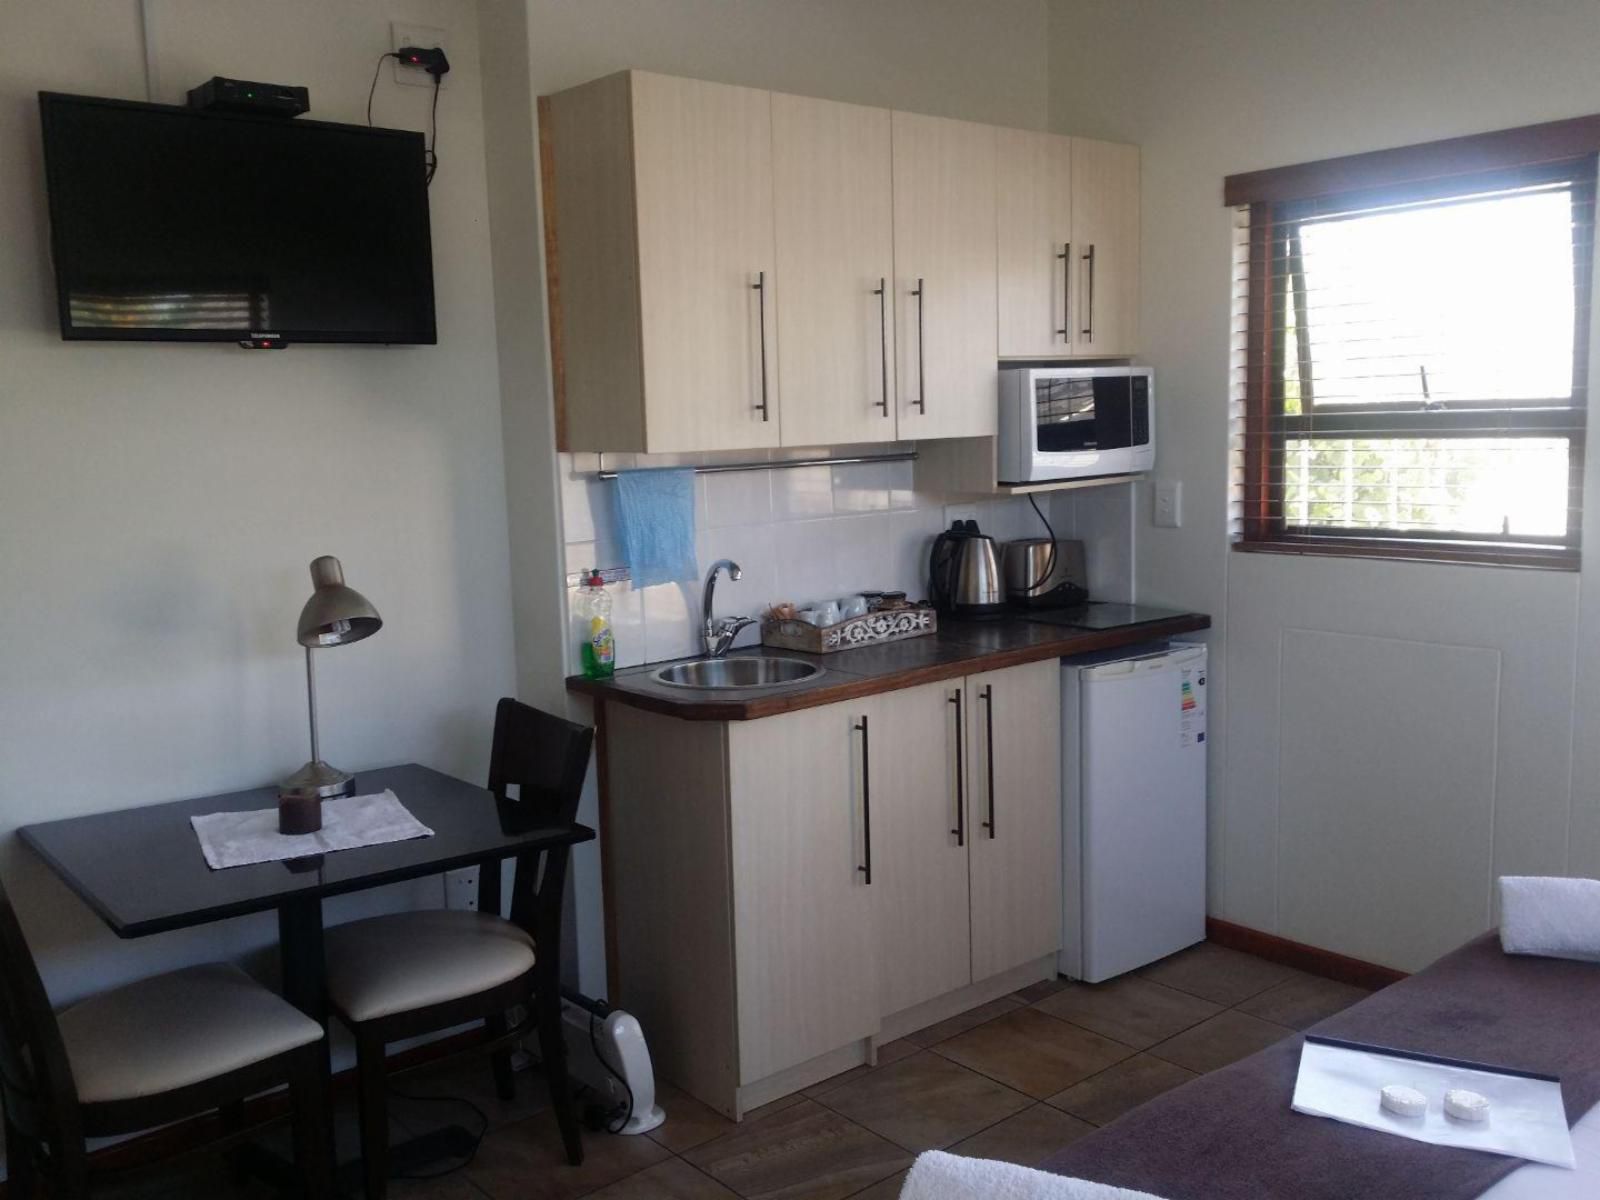 12 On Beach Guest House Saldanha Western Cape South Africa Unsaturated, Kitchen